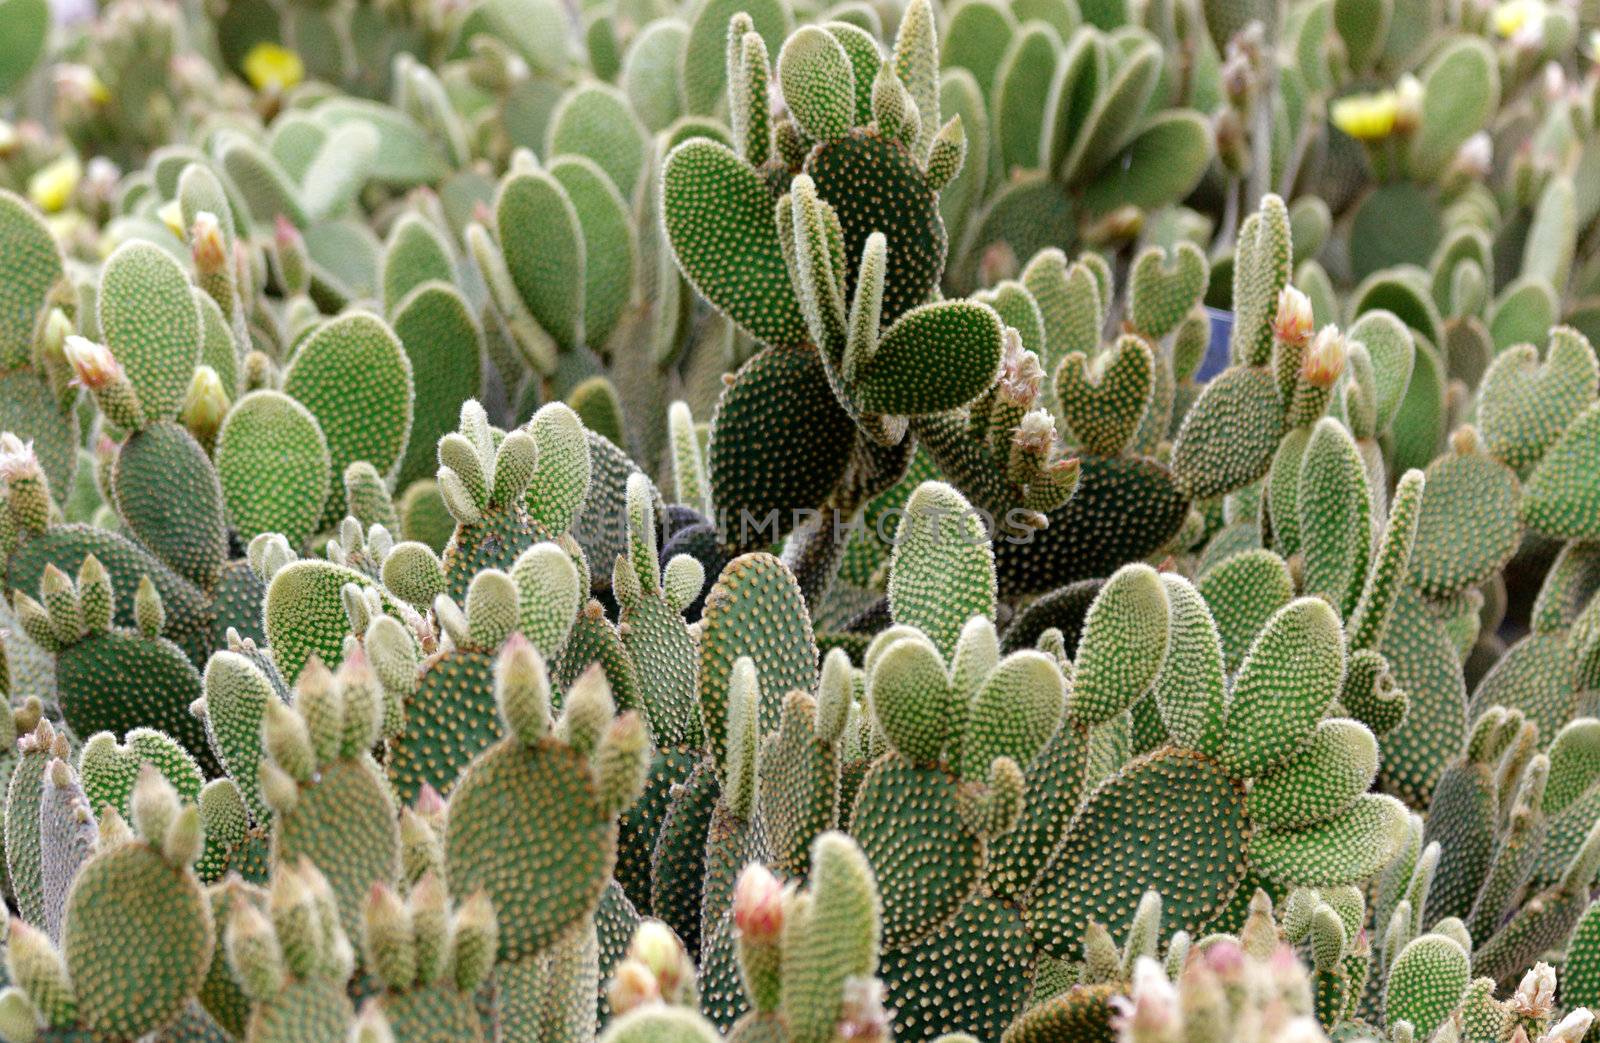 View of a cactus